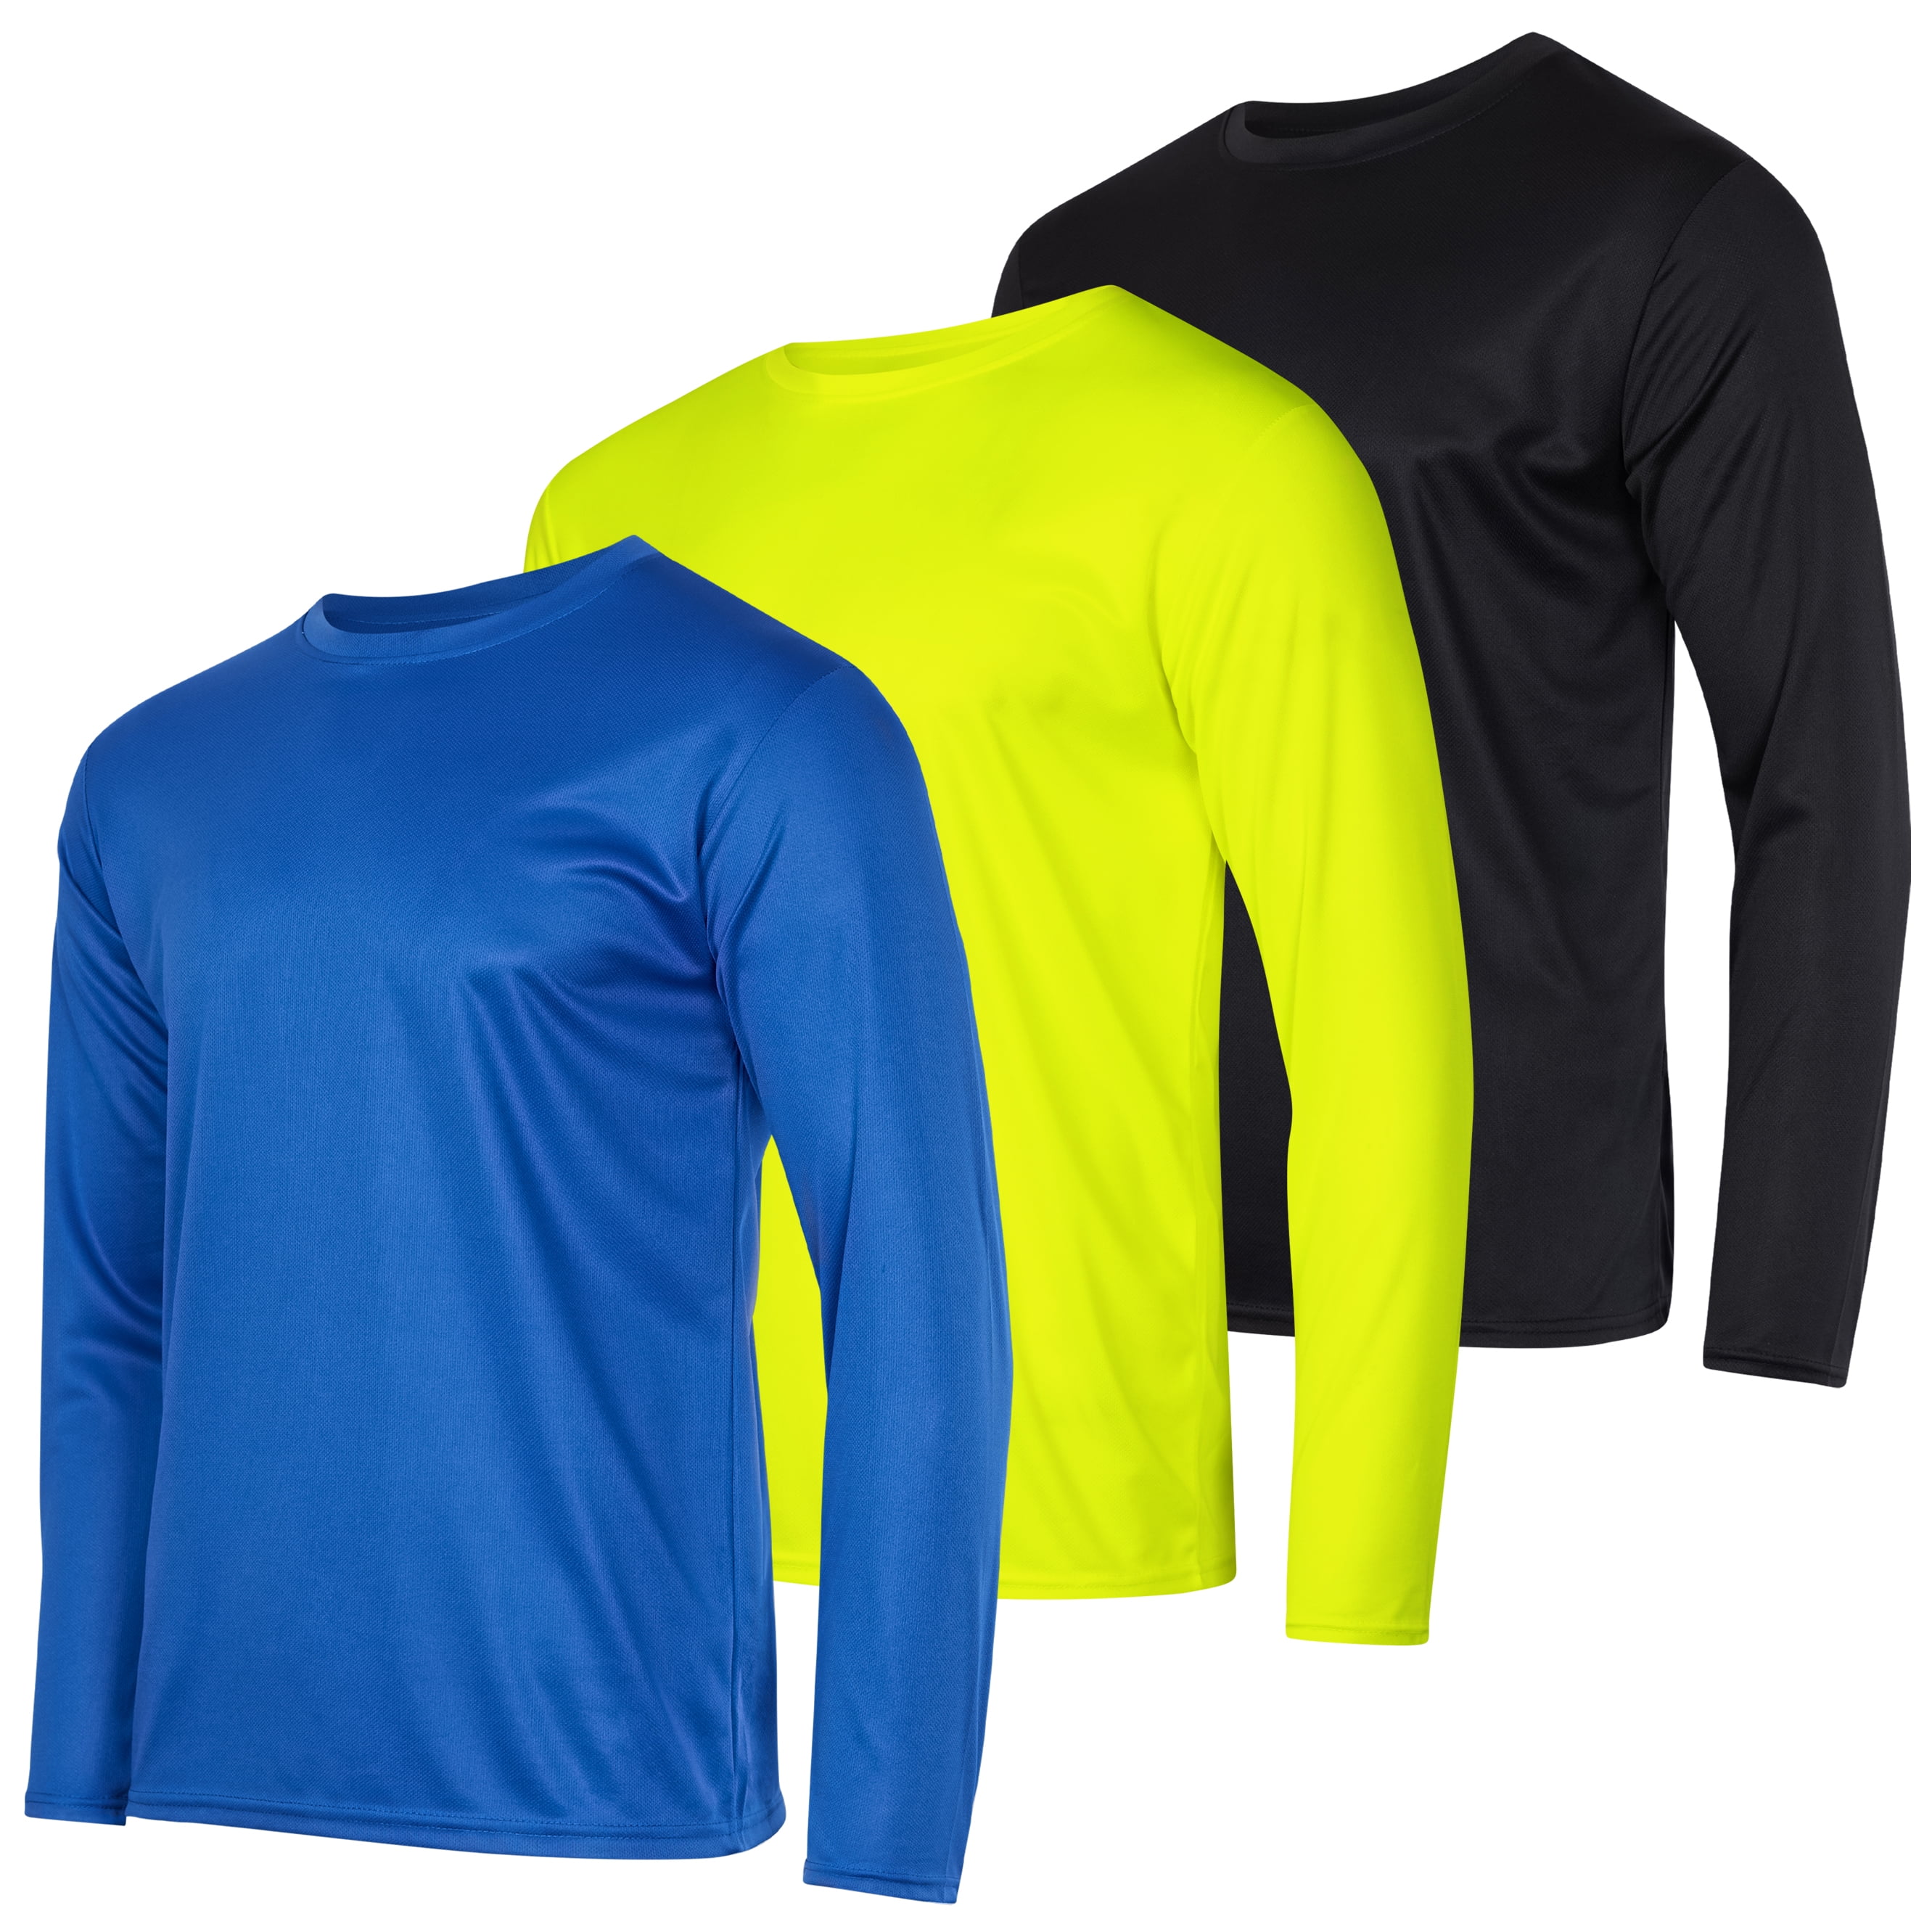 Real Essentials 3 & 5 Pack: Men's Mesh Quick Dry Athletic Long